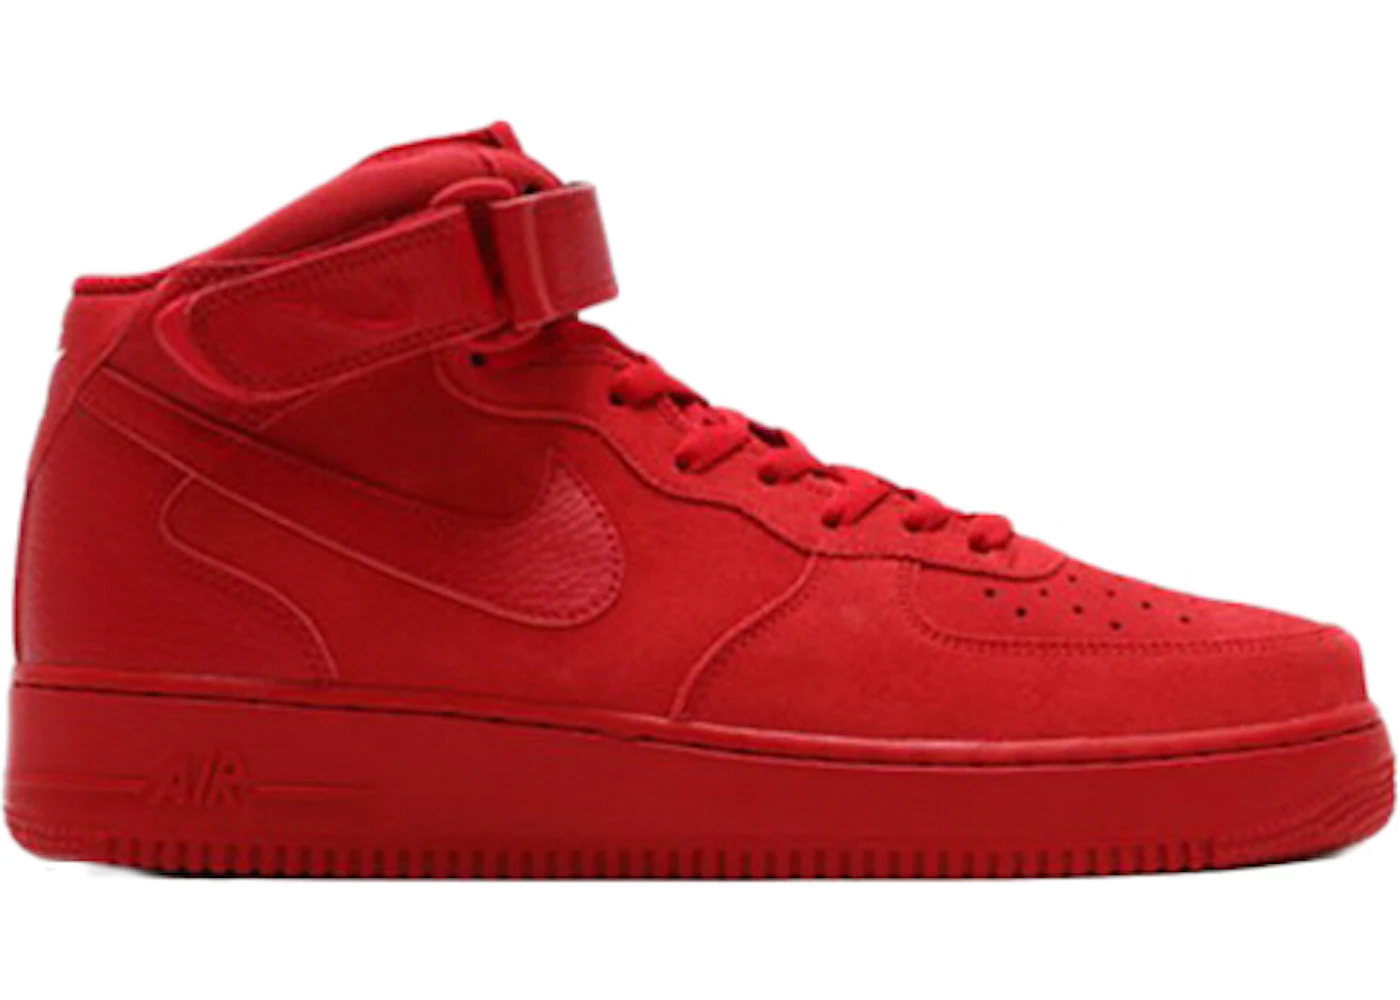 Nike Air Force 1 Mid Gym Red Men's - 819677-600 - US